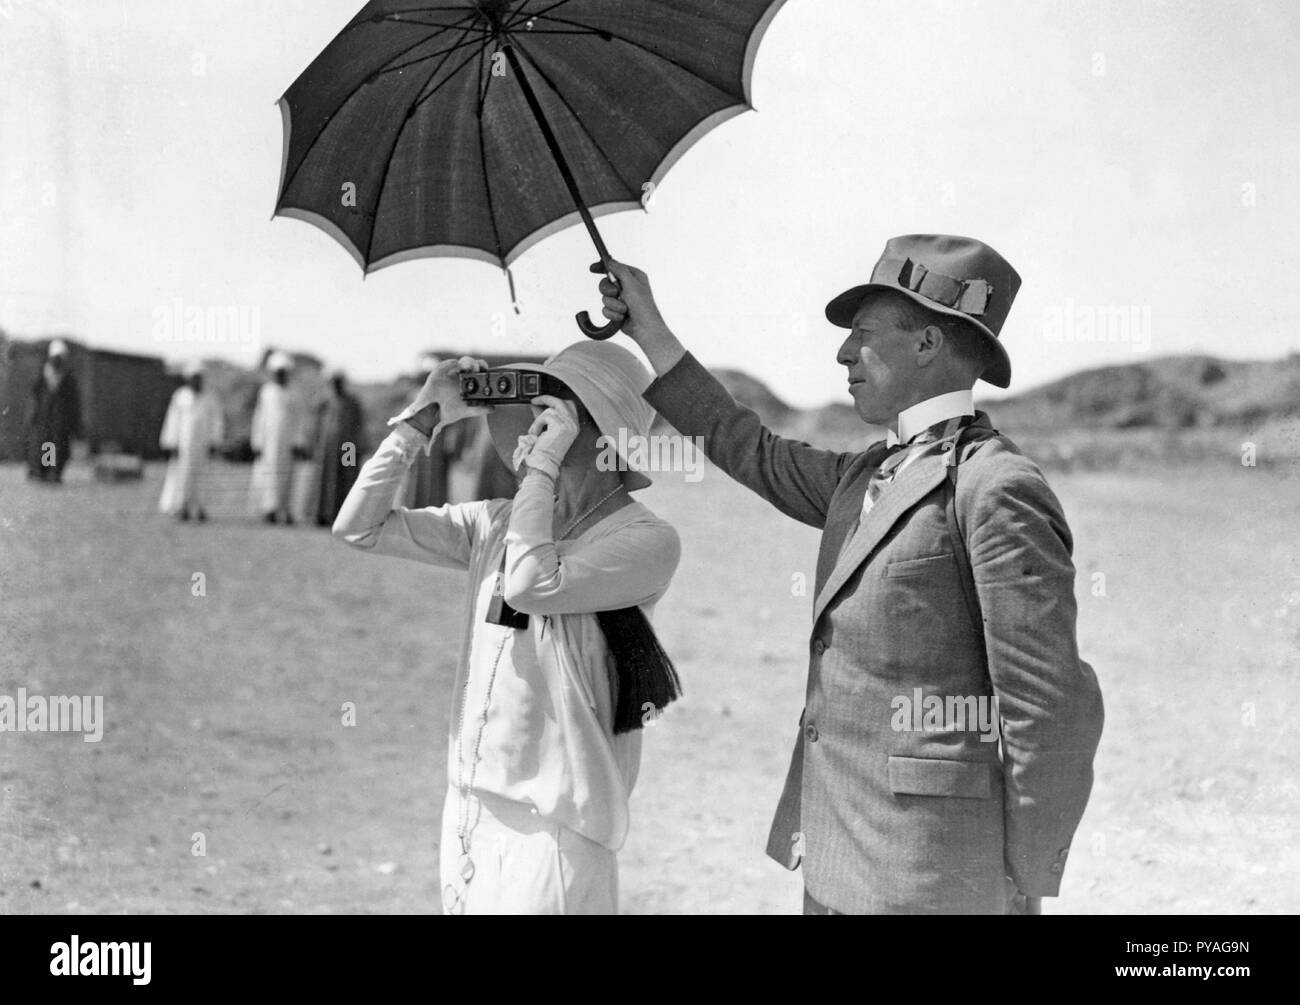 Taking pictures in the 1930s. A woman is photographing something with a Stereo camera. A man is standing by her side holding an umbrella to block the sun. 1930s Stock Photo